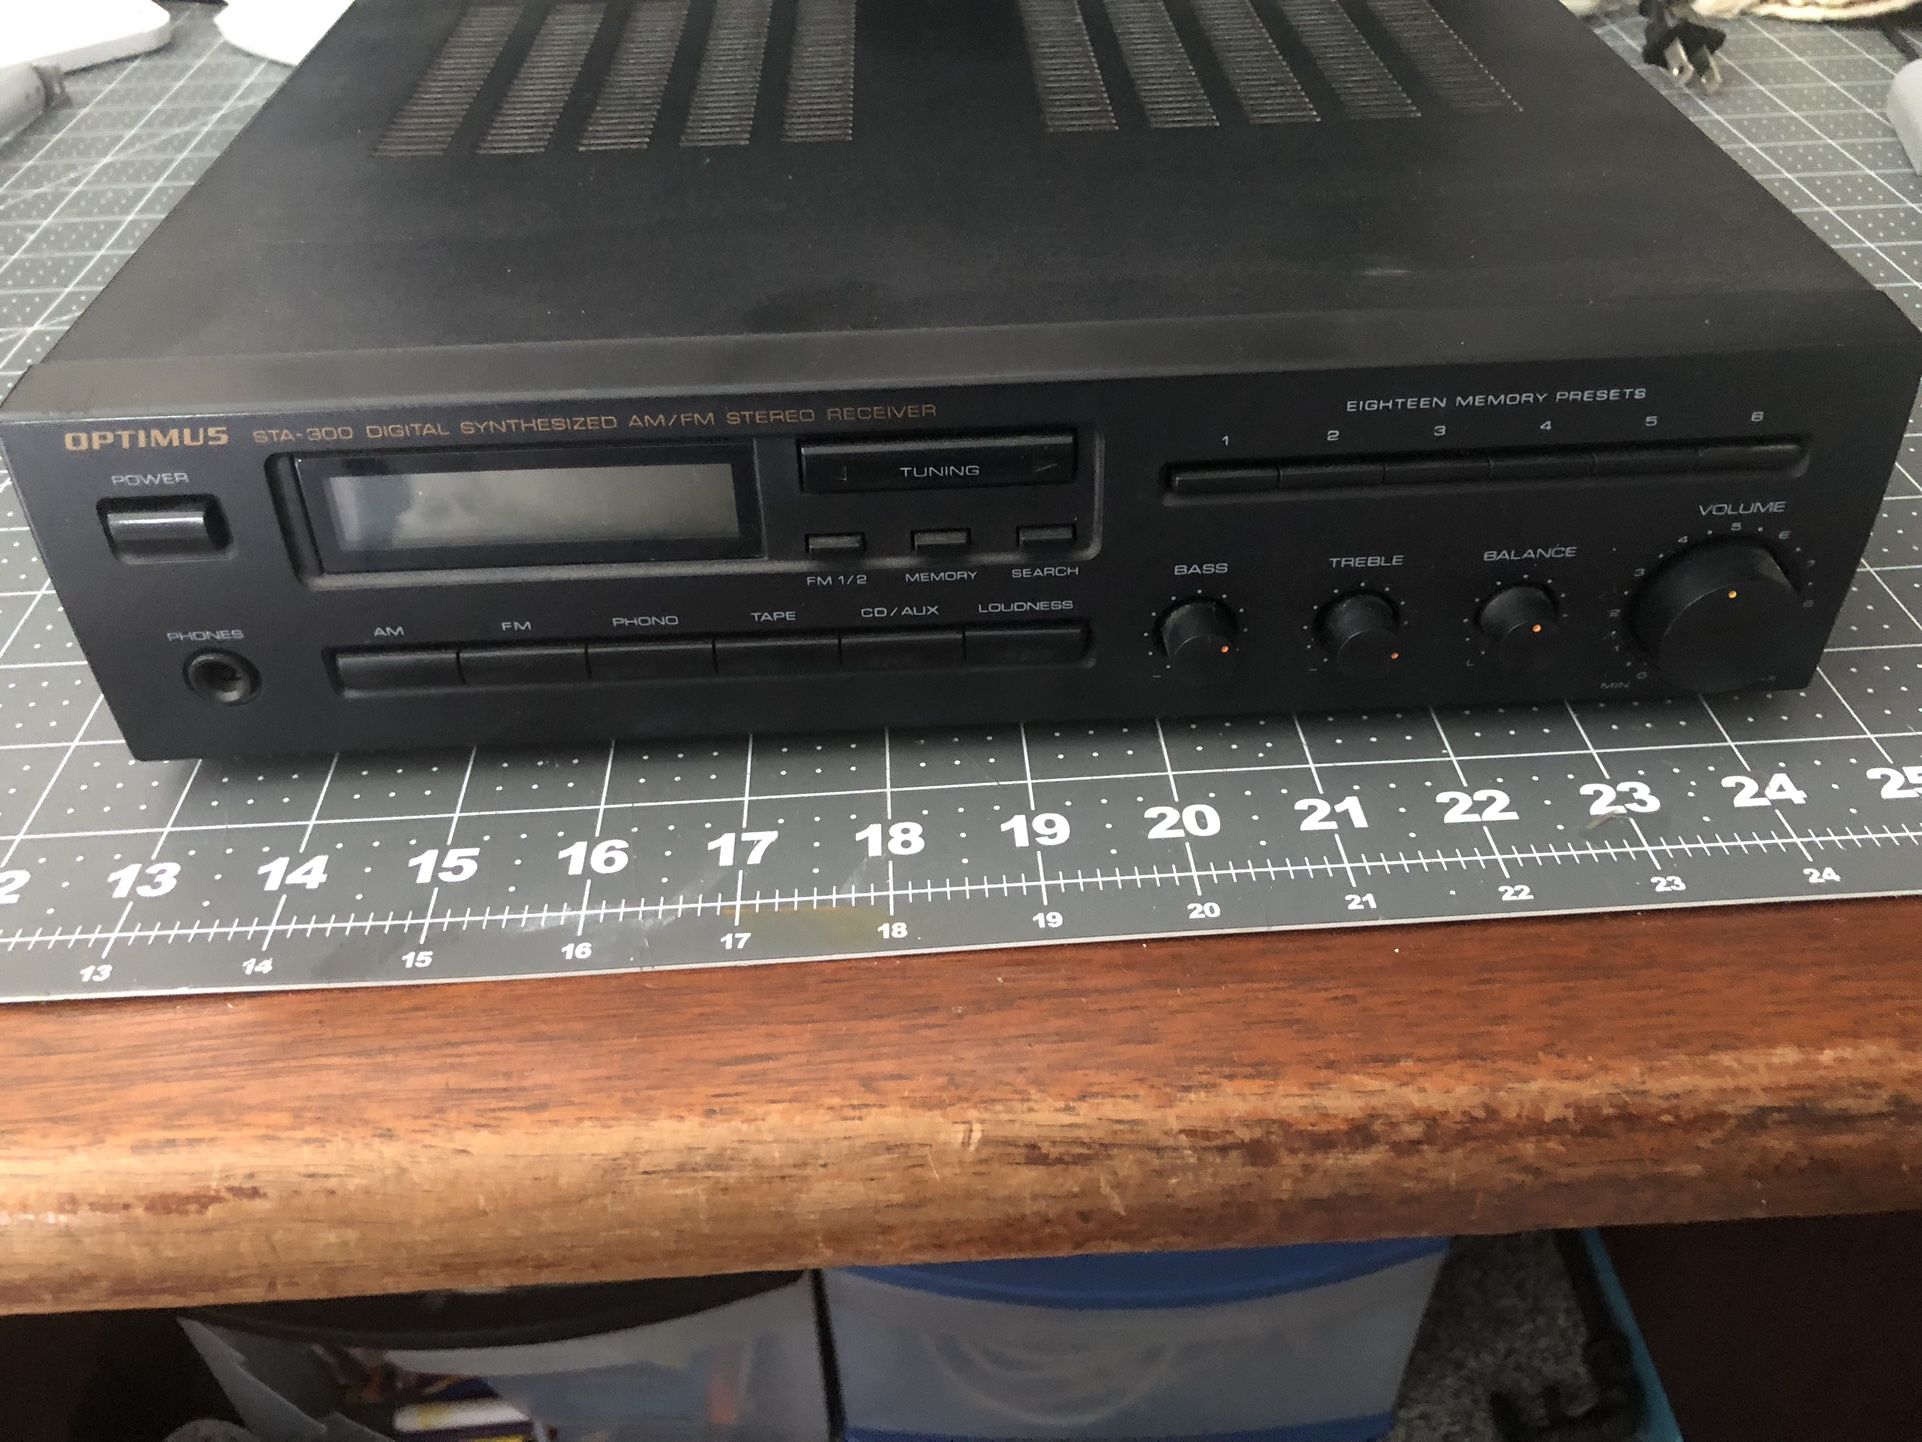 OPTIMUS STA-300 Digital Synthesized AM/FM Stereo Receiver No. 31-1991 Excellent